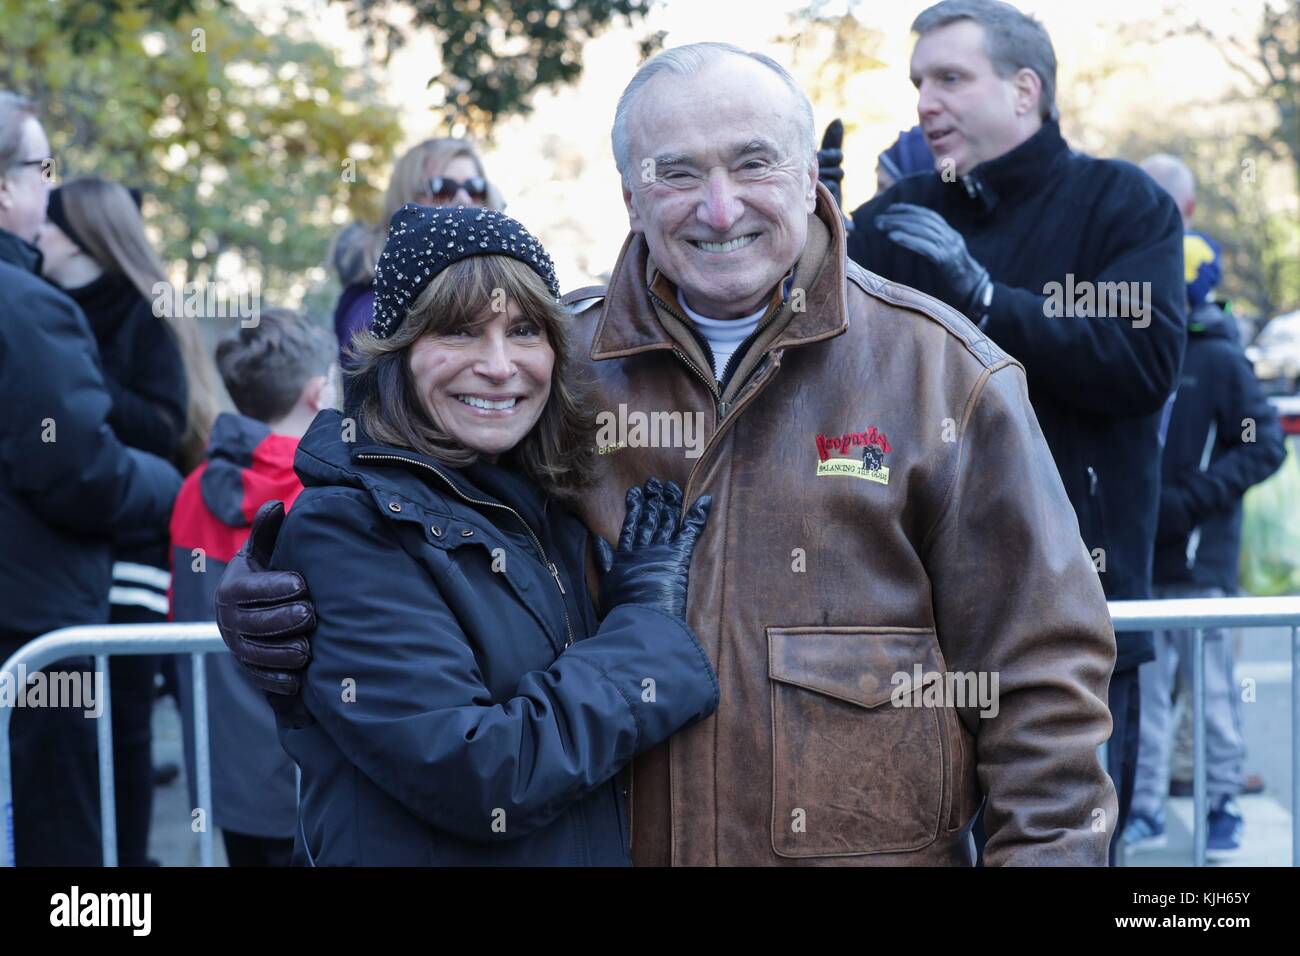 New York City. 23rd Nov, 2017. Central Park West, New York, USA, November 23 2017 - Ex-Police Commissioner William Bratton attends the 91st Annual Macy's Thanksgiving Day Parade today in New York City. Credit: Luiz Rampelotto/EuropaNewswire | usage worldwide/dpa/Alamy Live News Stock Photo